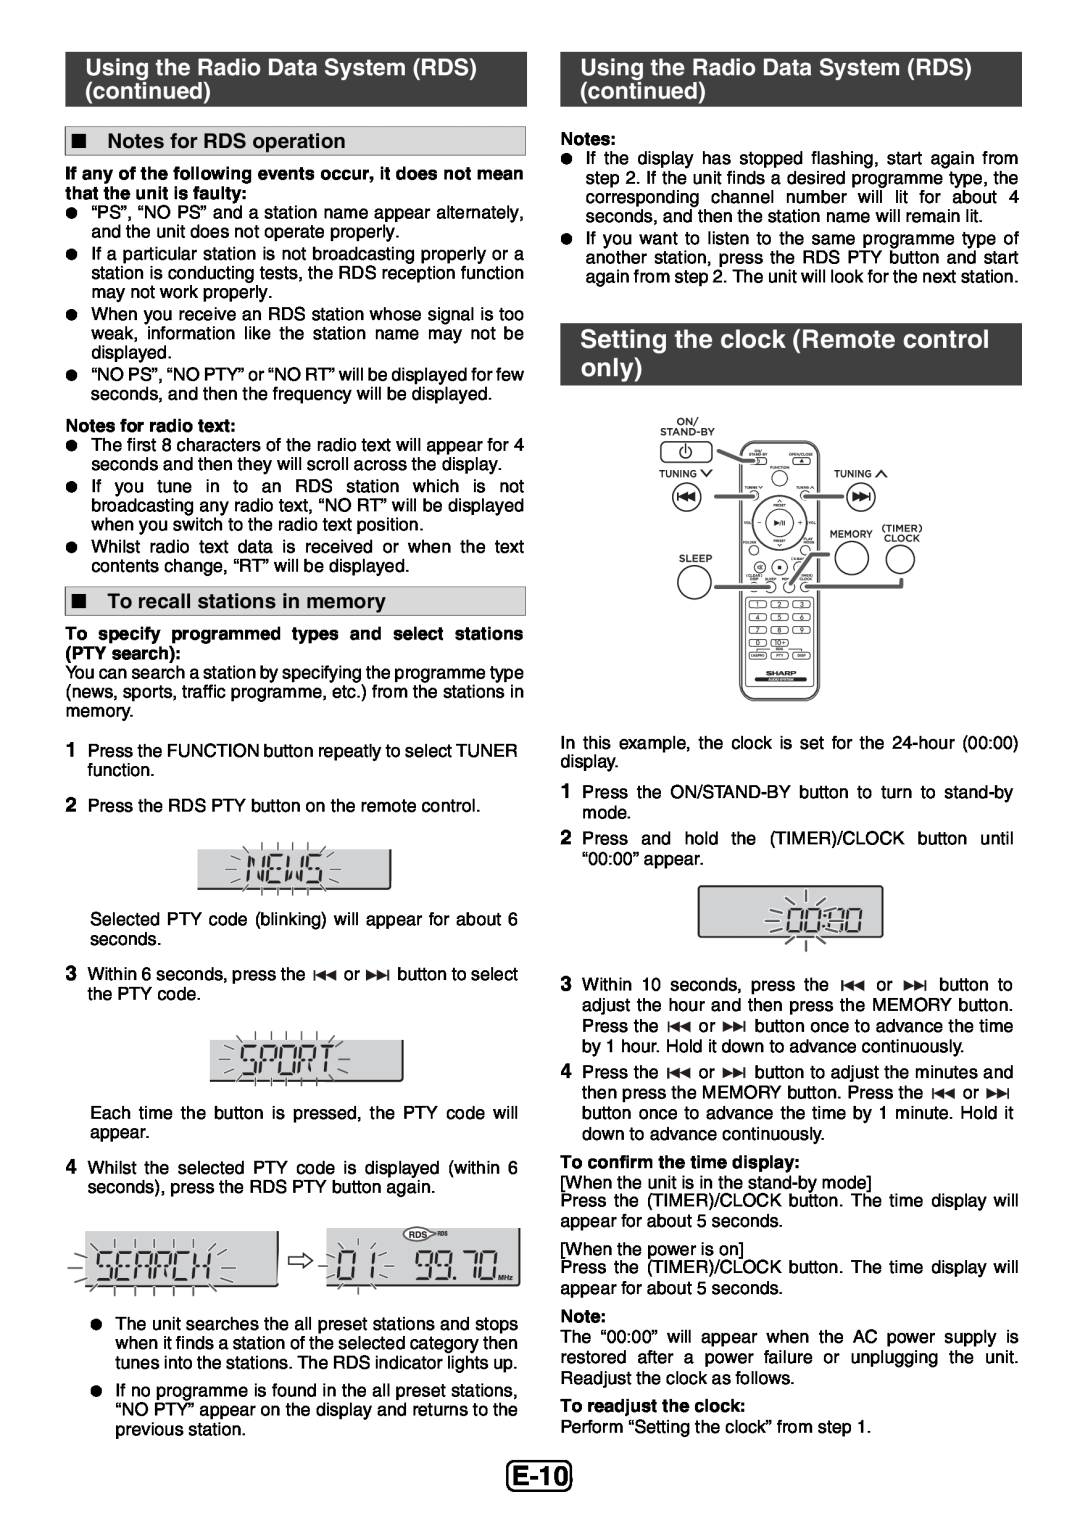 Sharp XL-E12H E-10, Setting the clock Remote control only, Notes for RDS operation, To recall stations in memory 